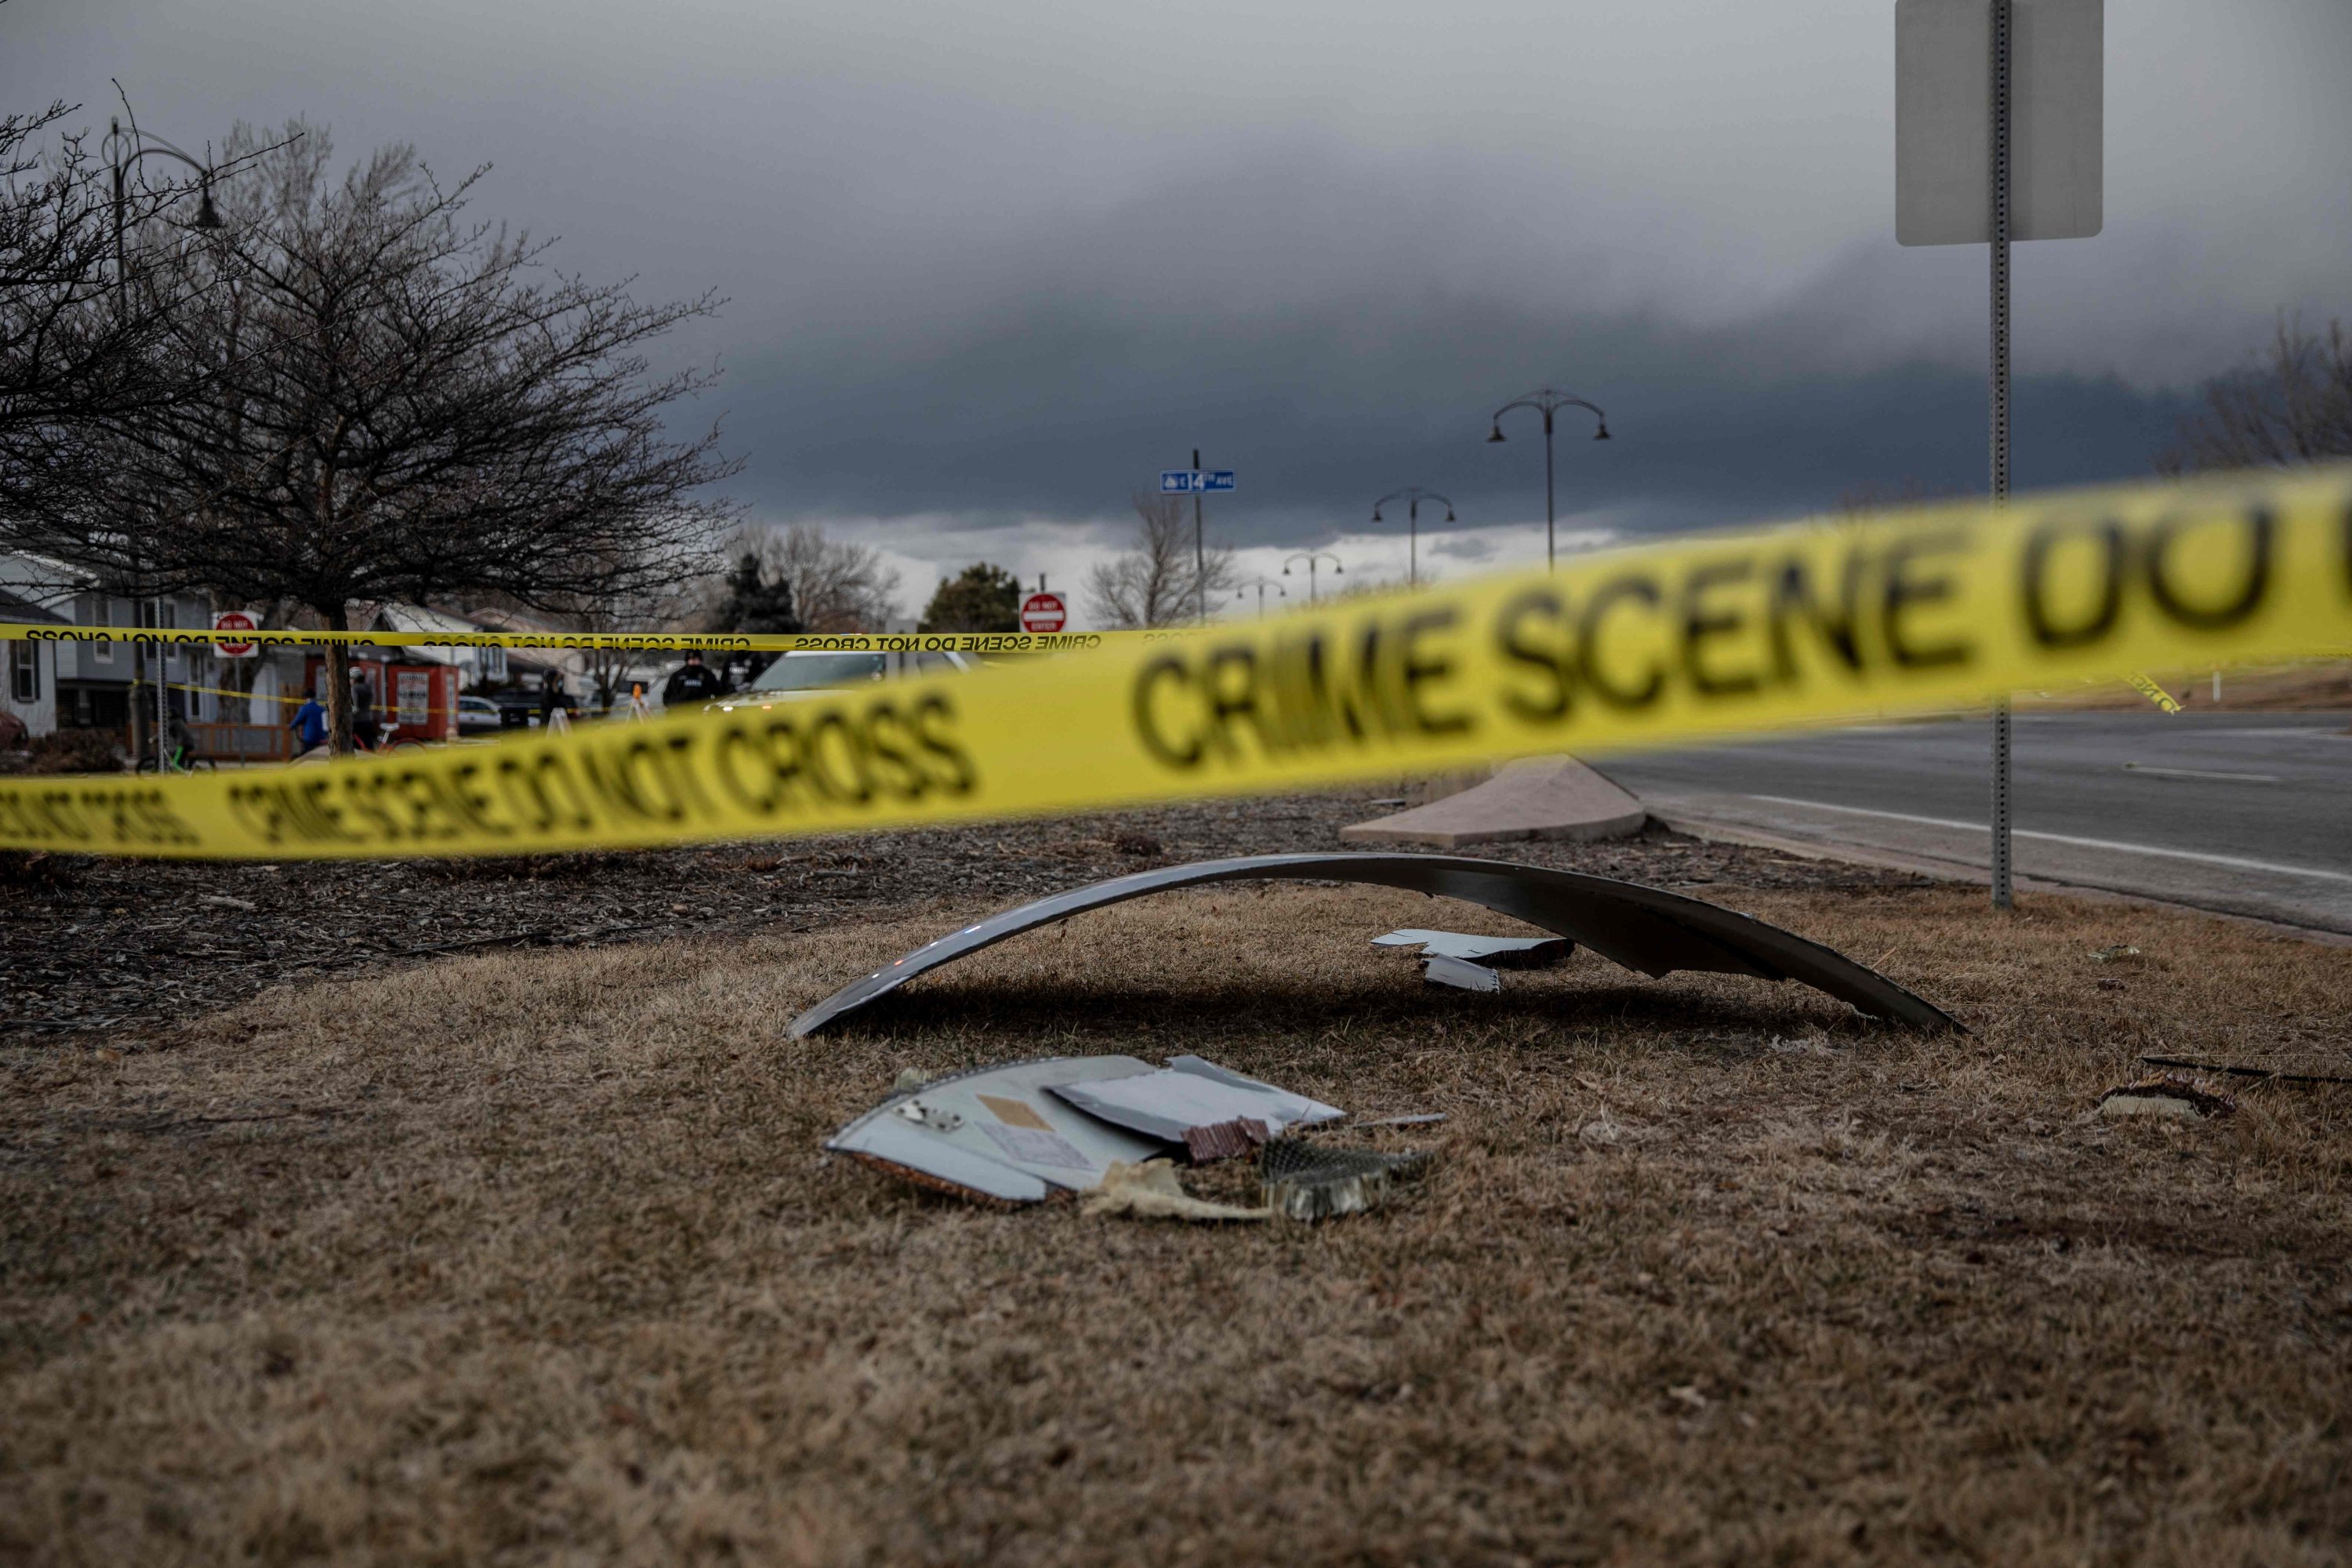 Debris fallen from a United Airlines airplane's engine lay scattered throughout the neighborhood of Broomfield, outside Denver, Colorado, U.S., Feb. 20, 2021. (AFP Photo)